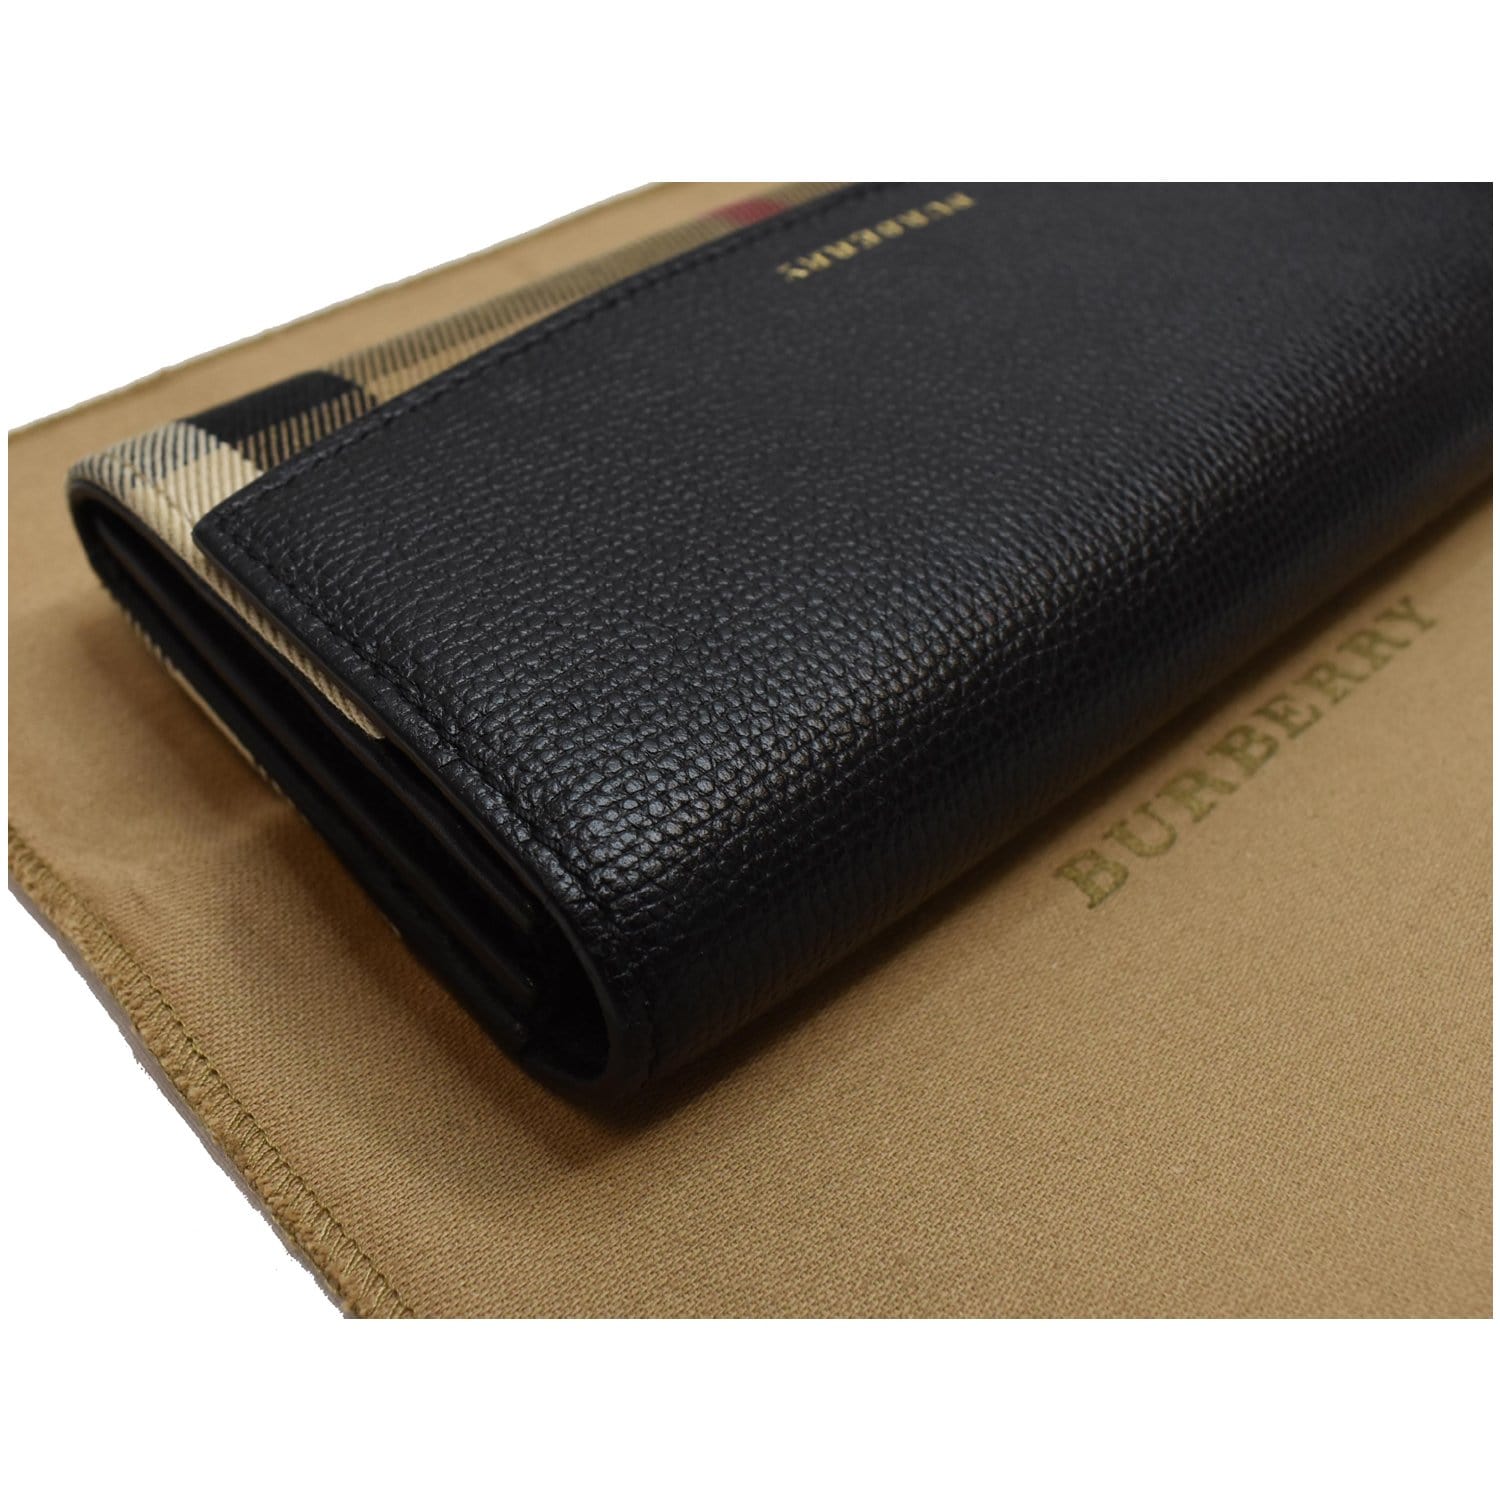 Burberry Printed Leather Wallet